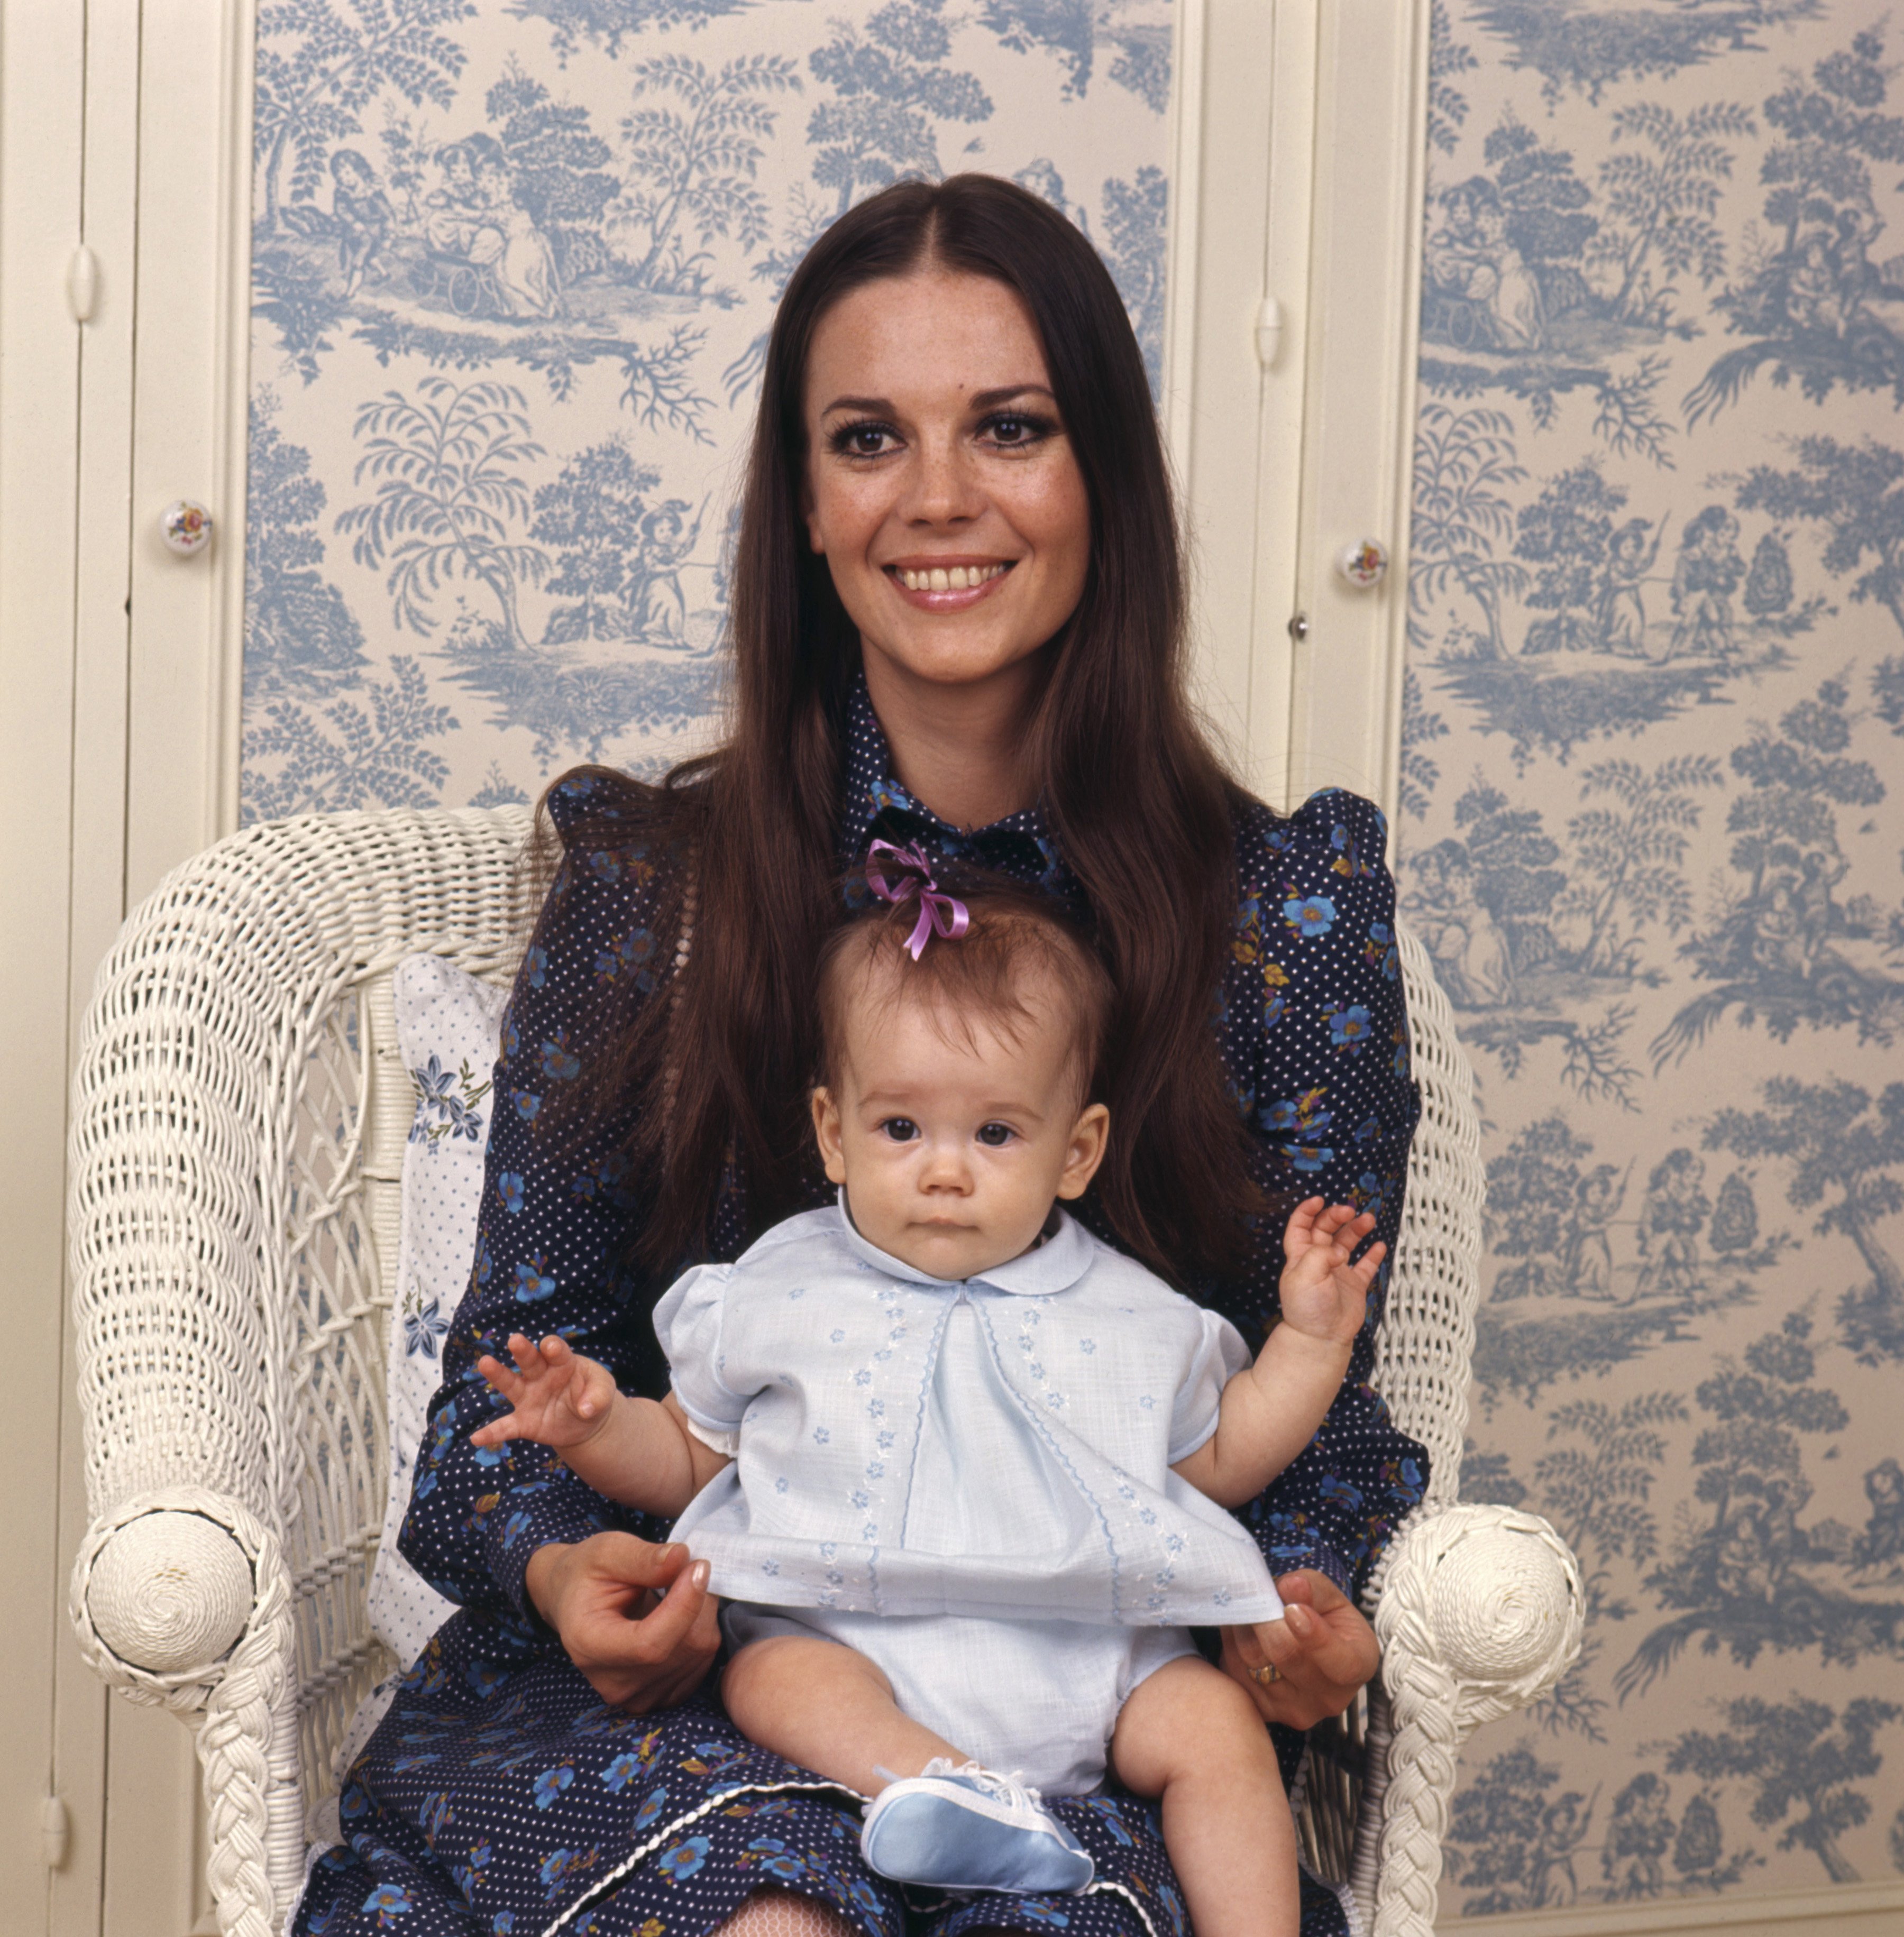 Natalie Wood pictured with her baby daughter Natasha Gregson Wagner in 1970 ┃Source: Getty Images